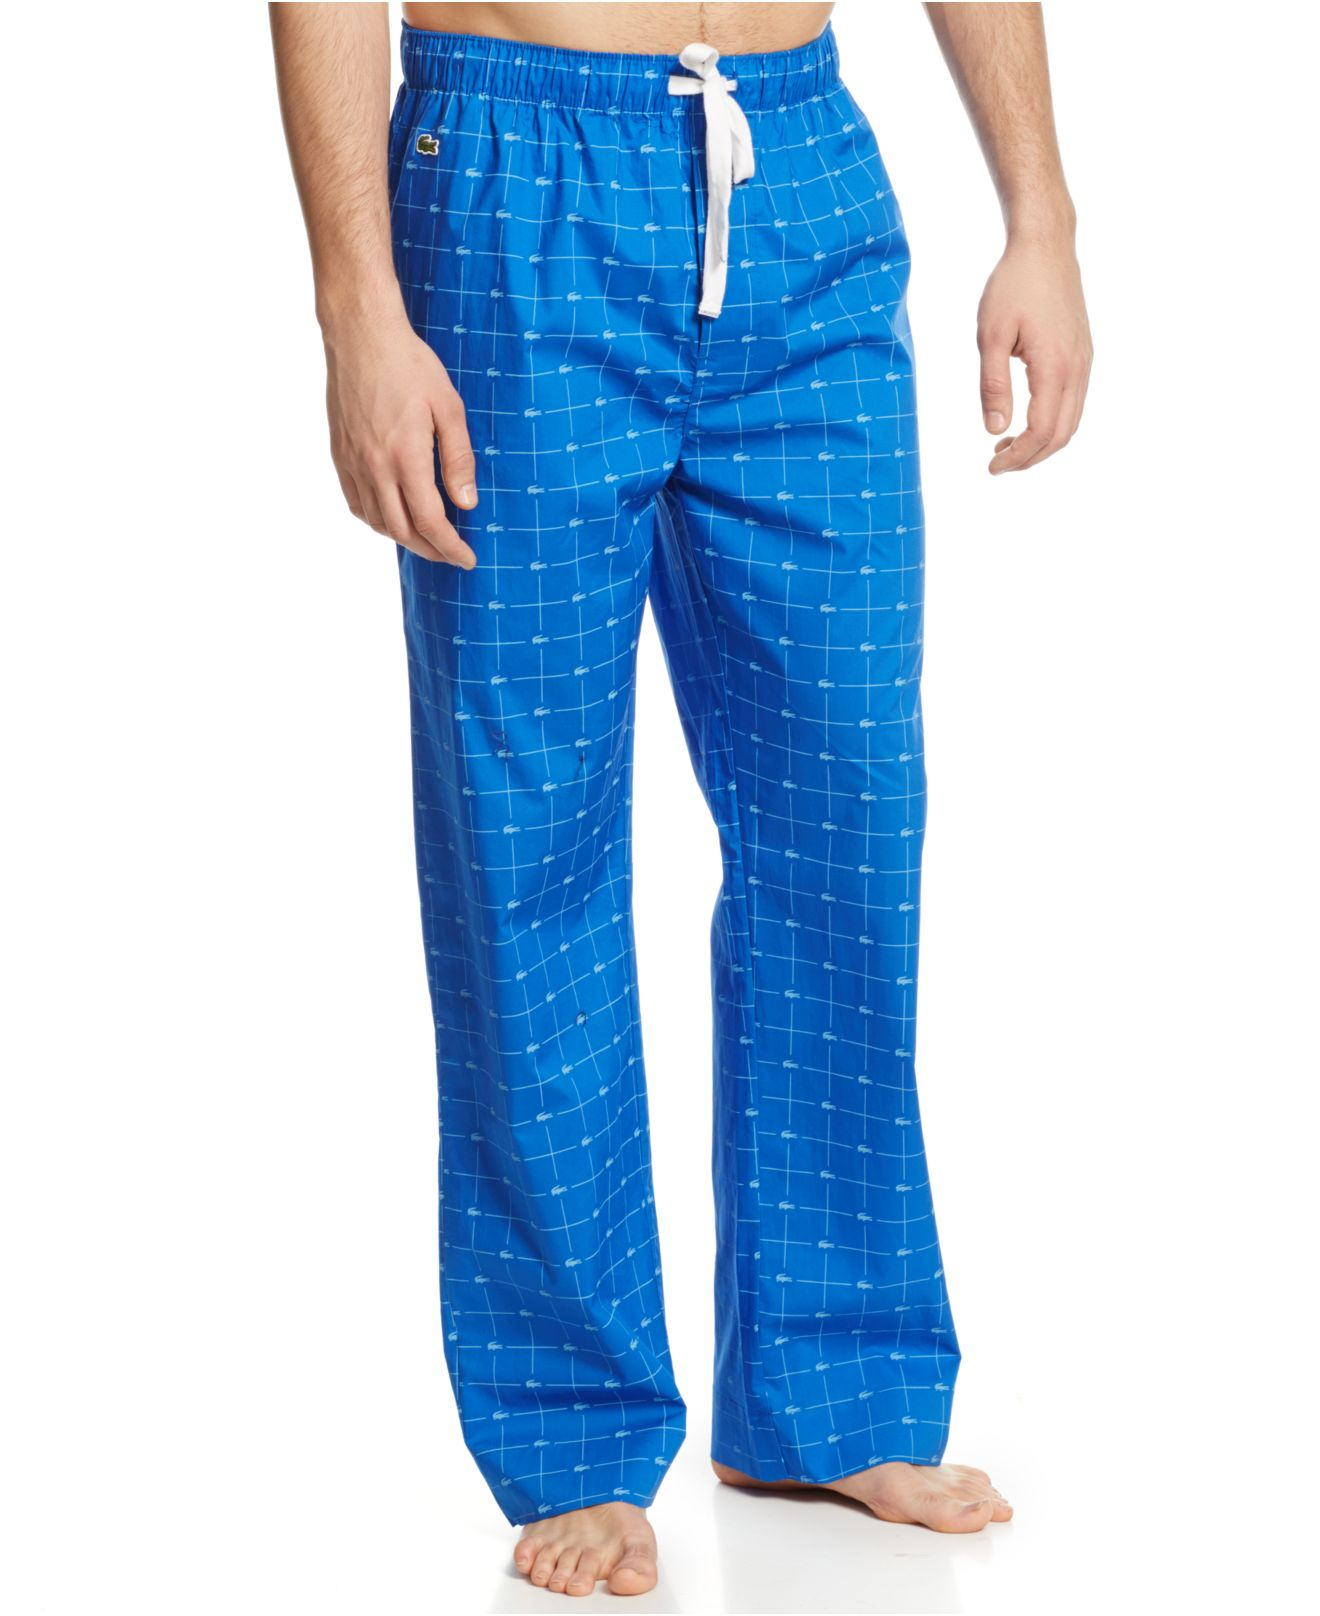 Lacoste Croc Print Pajama Pants in Blue for Men - Lyst